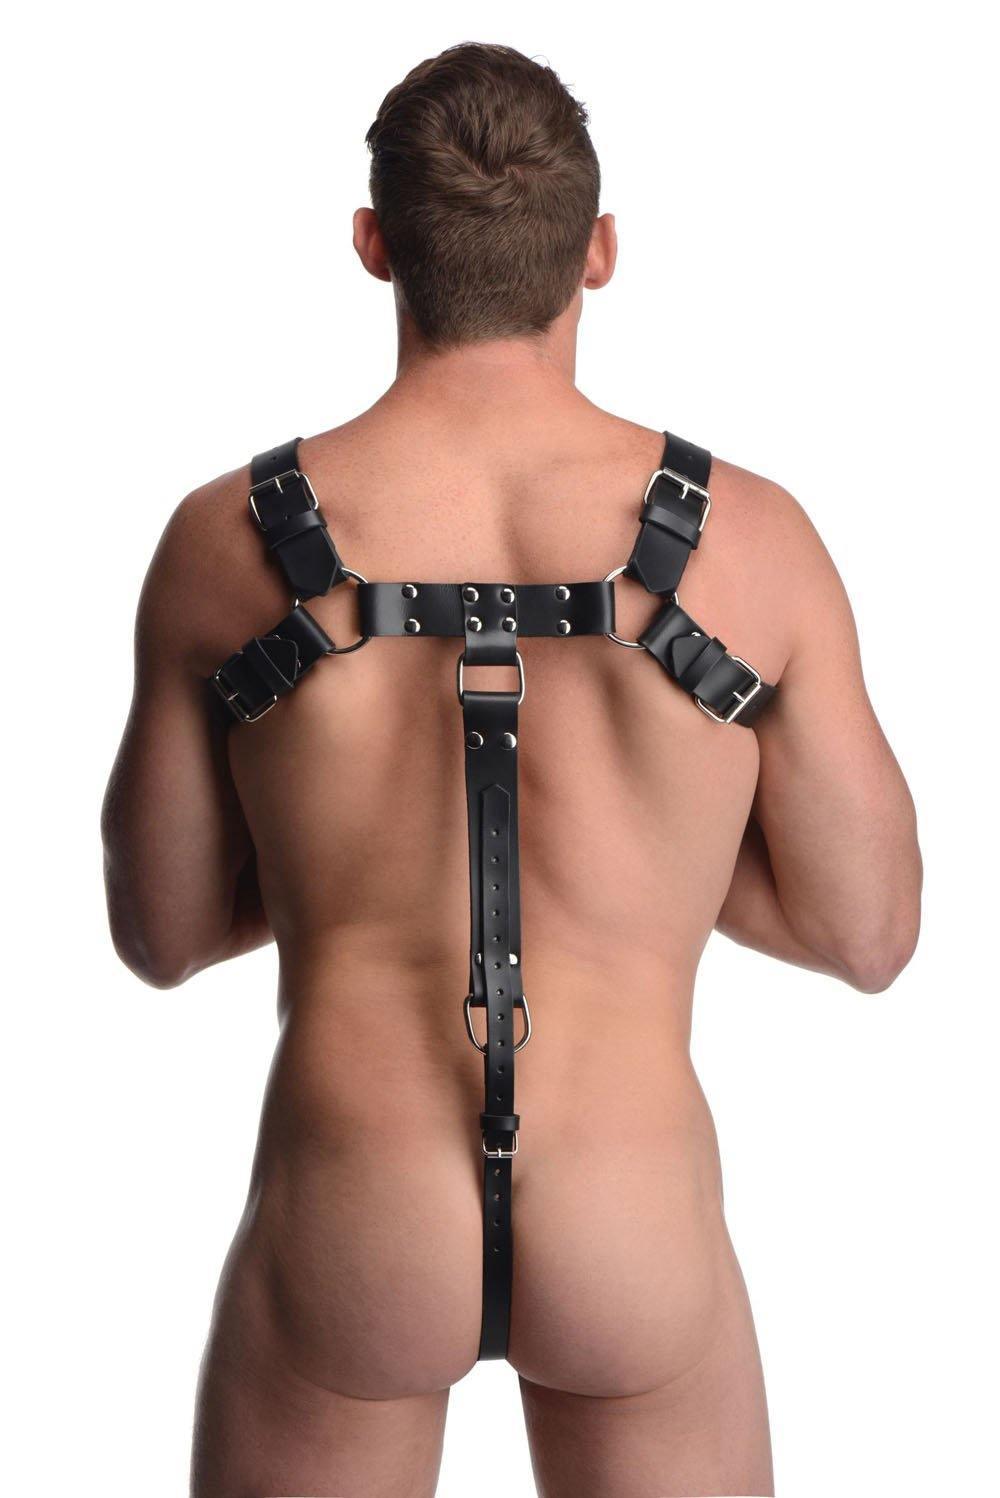 English Bull Dog Harness With Cock Strap - My Sex Toy Hub